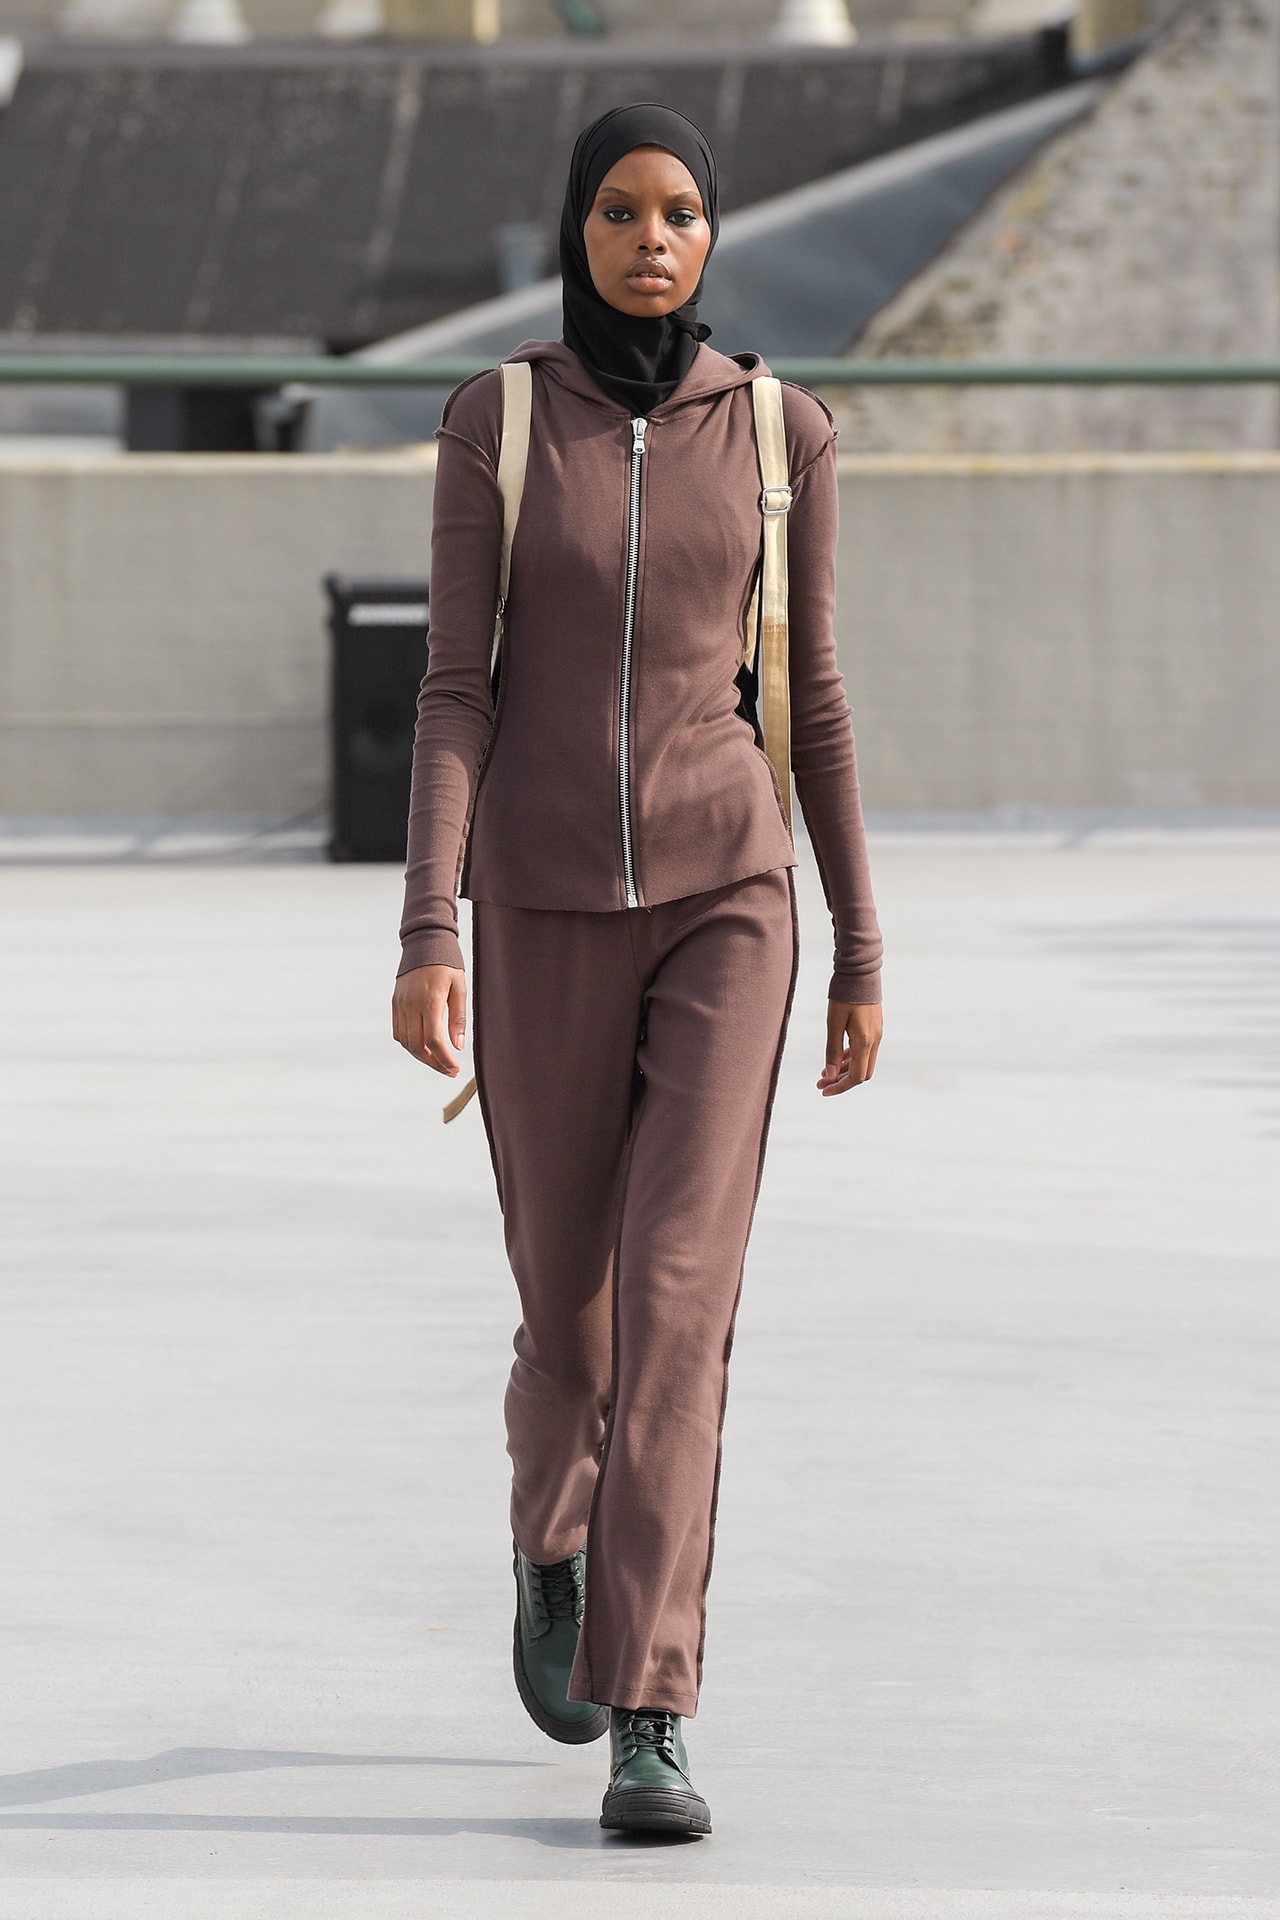 (di)vision Spring Summer 2022 runway show collection division Copenhagen Danish Brand Fashion Design Simon Nanna Wick upcycling jacket hoodie pants